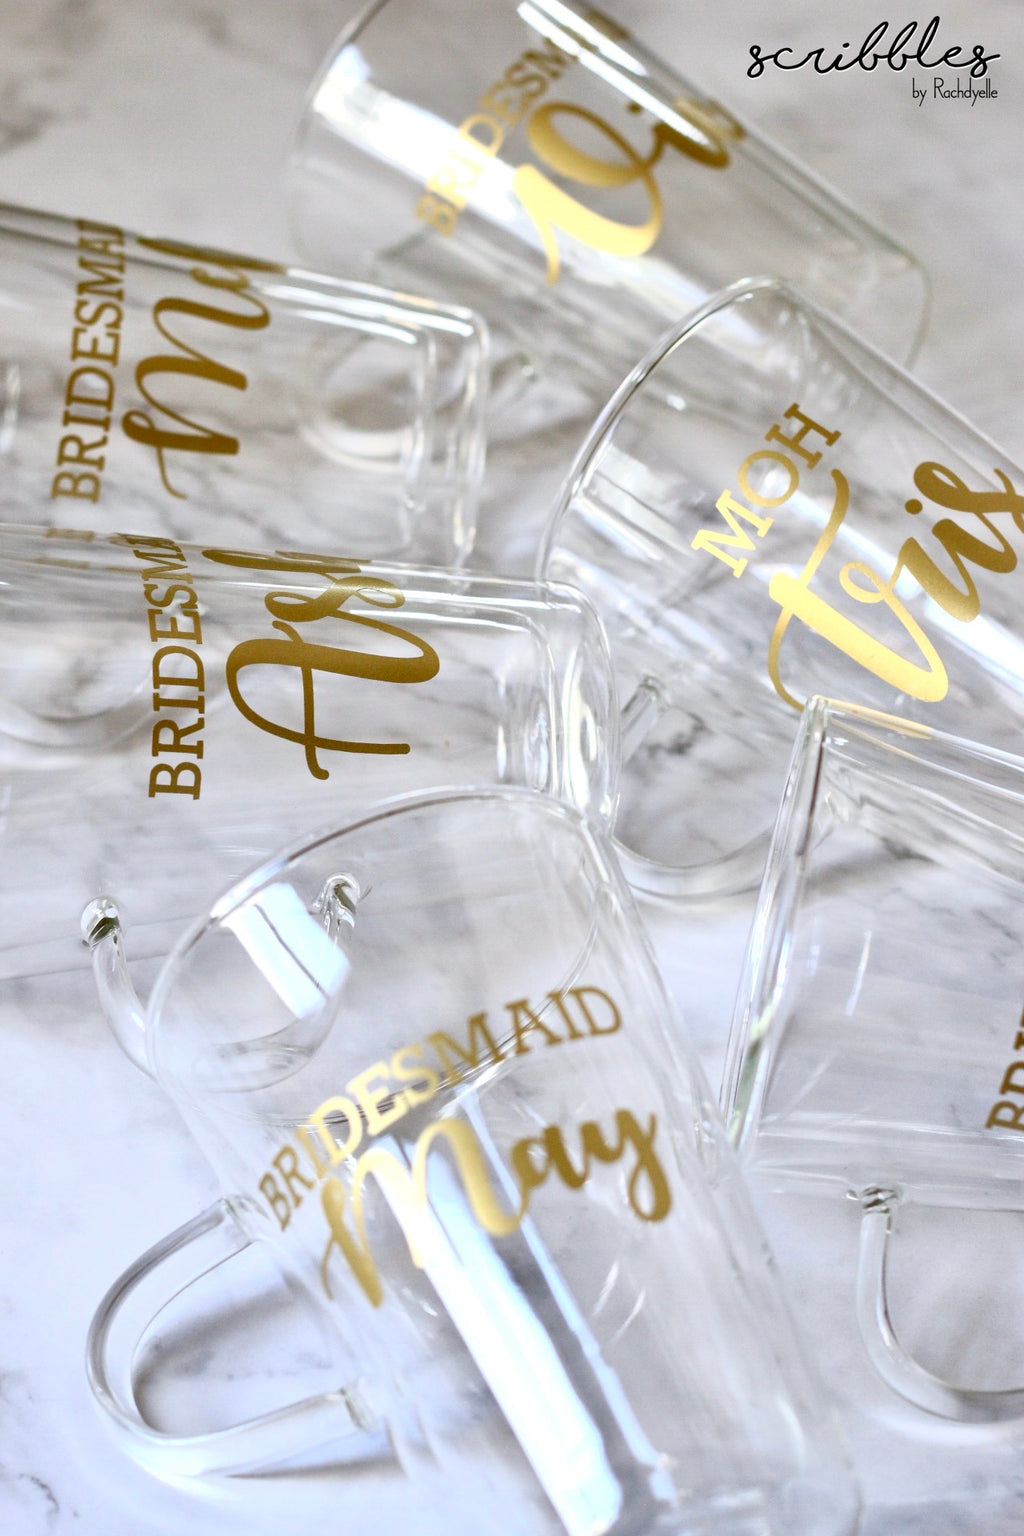 Personalised Double Wall Glass - Scribbles by Rachdyelle